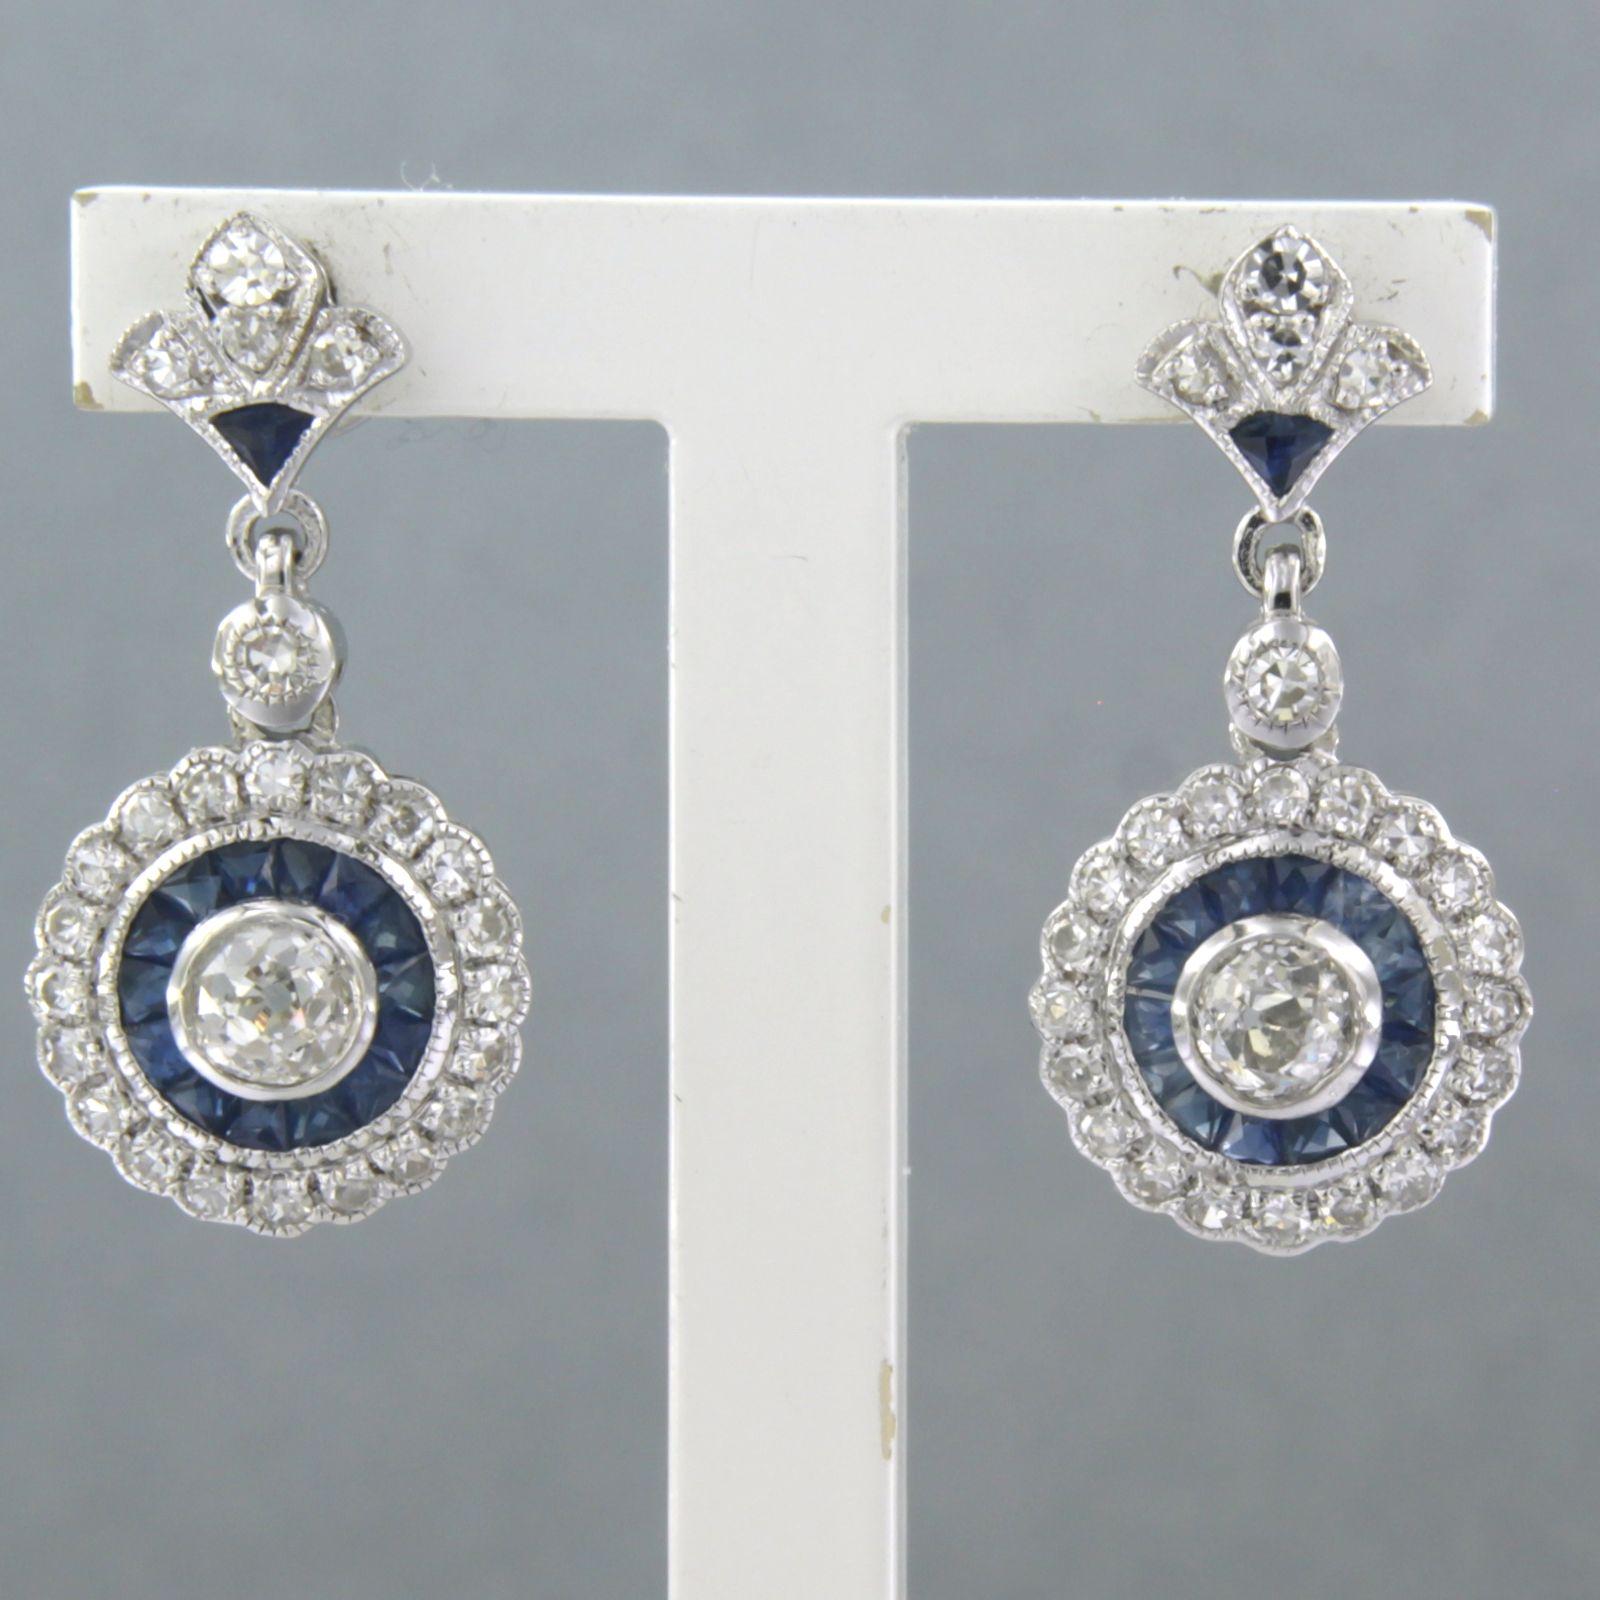 14 kt white gold entourage earrings with sapphire up to .1.02 ct, old mine cut and single cut diamond up to .0.81 ct - F/G – SI, VS/SI

Detailed description:

the dimensions of the earrings are 2.1 cm long by 1.0 cm wide

Total weight 3.7 grams

put